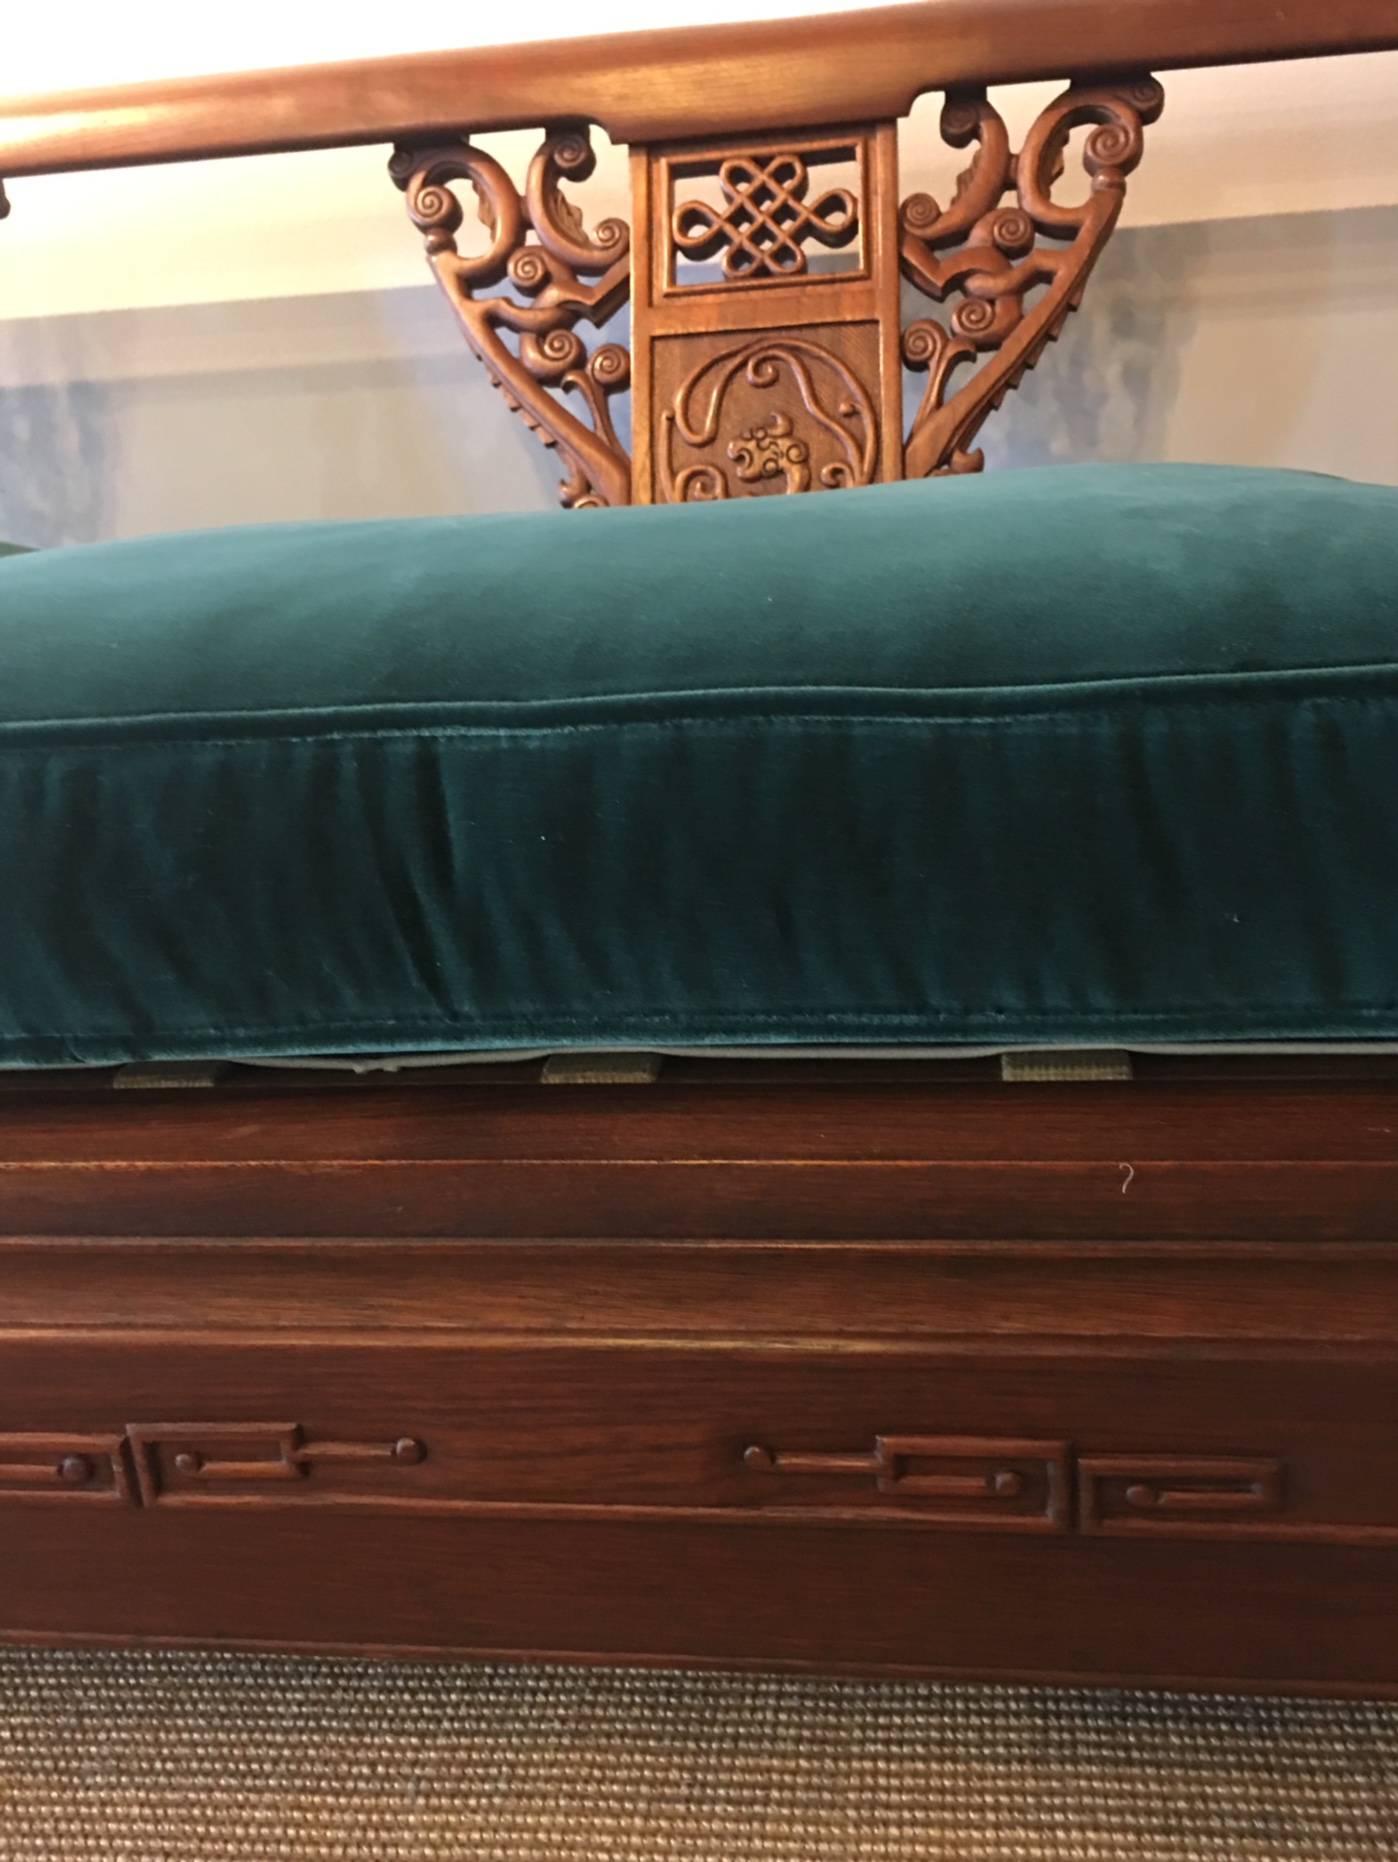 This carved wooden sofa is spectacular and in excellent condition. Three-seat cushions, ming feet, curved arms, carving on the base, this is a unique and lovely sofa. Beneath the cushions is a lift-up folding platform. The frame is in excellent